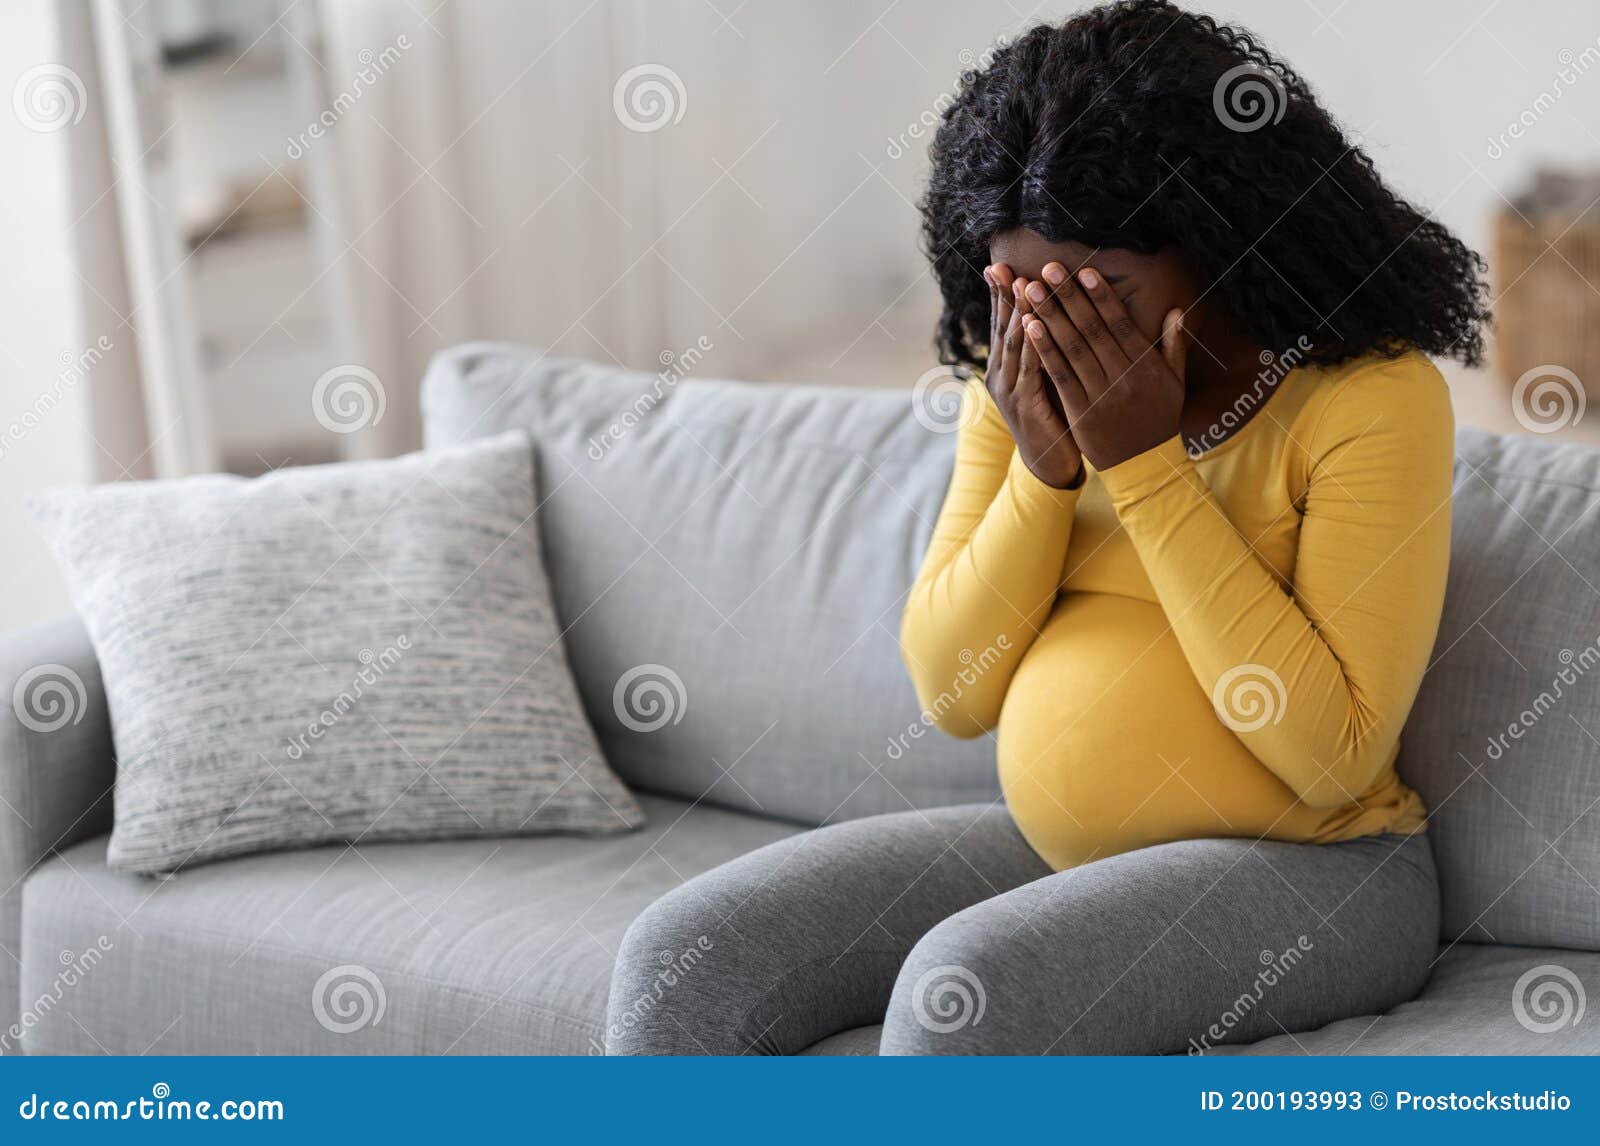 Young Pregnant Woman Feeling Sad and Crying at Home Stock Image ...